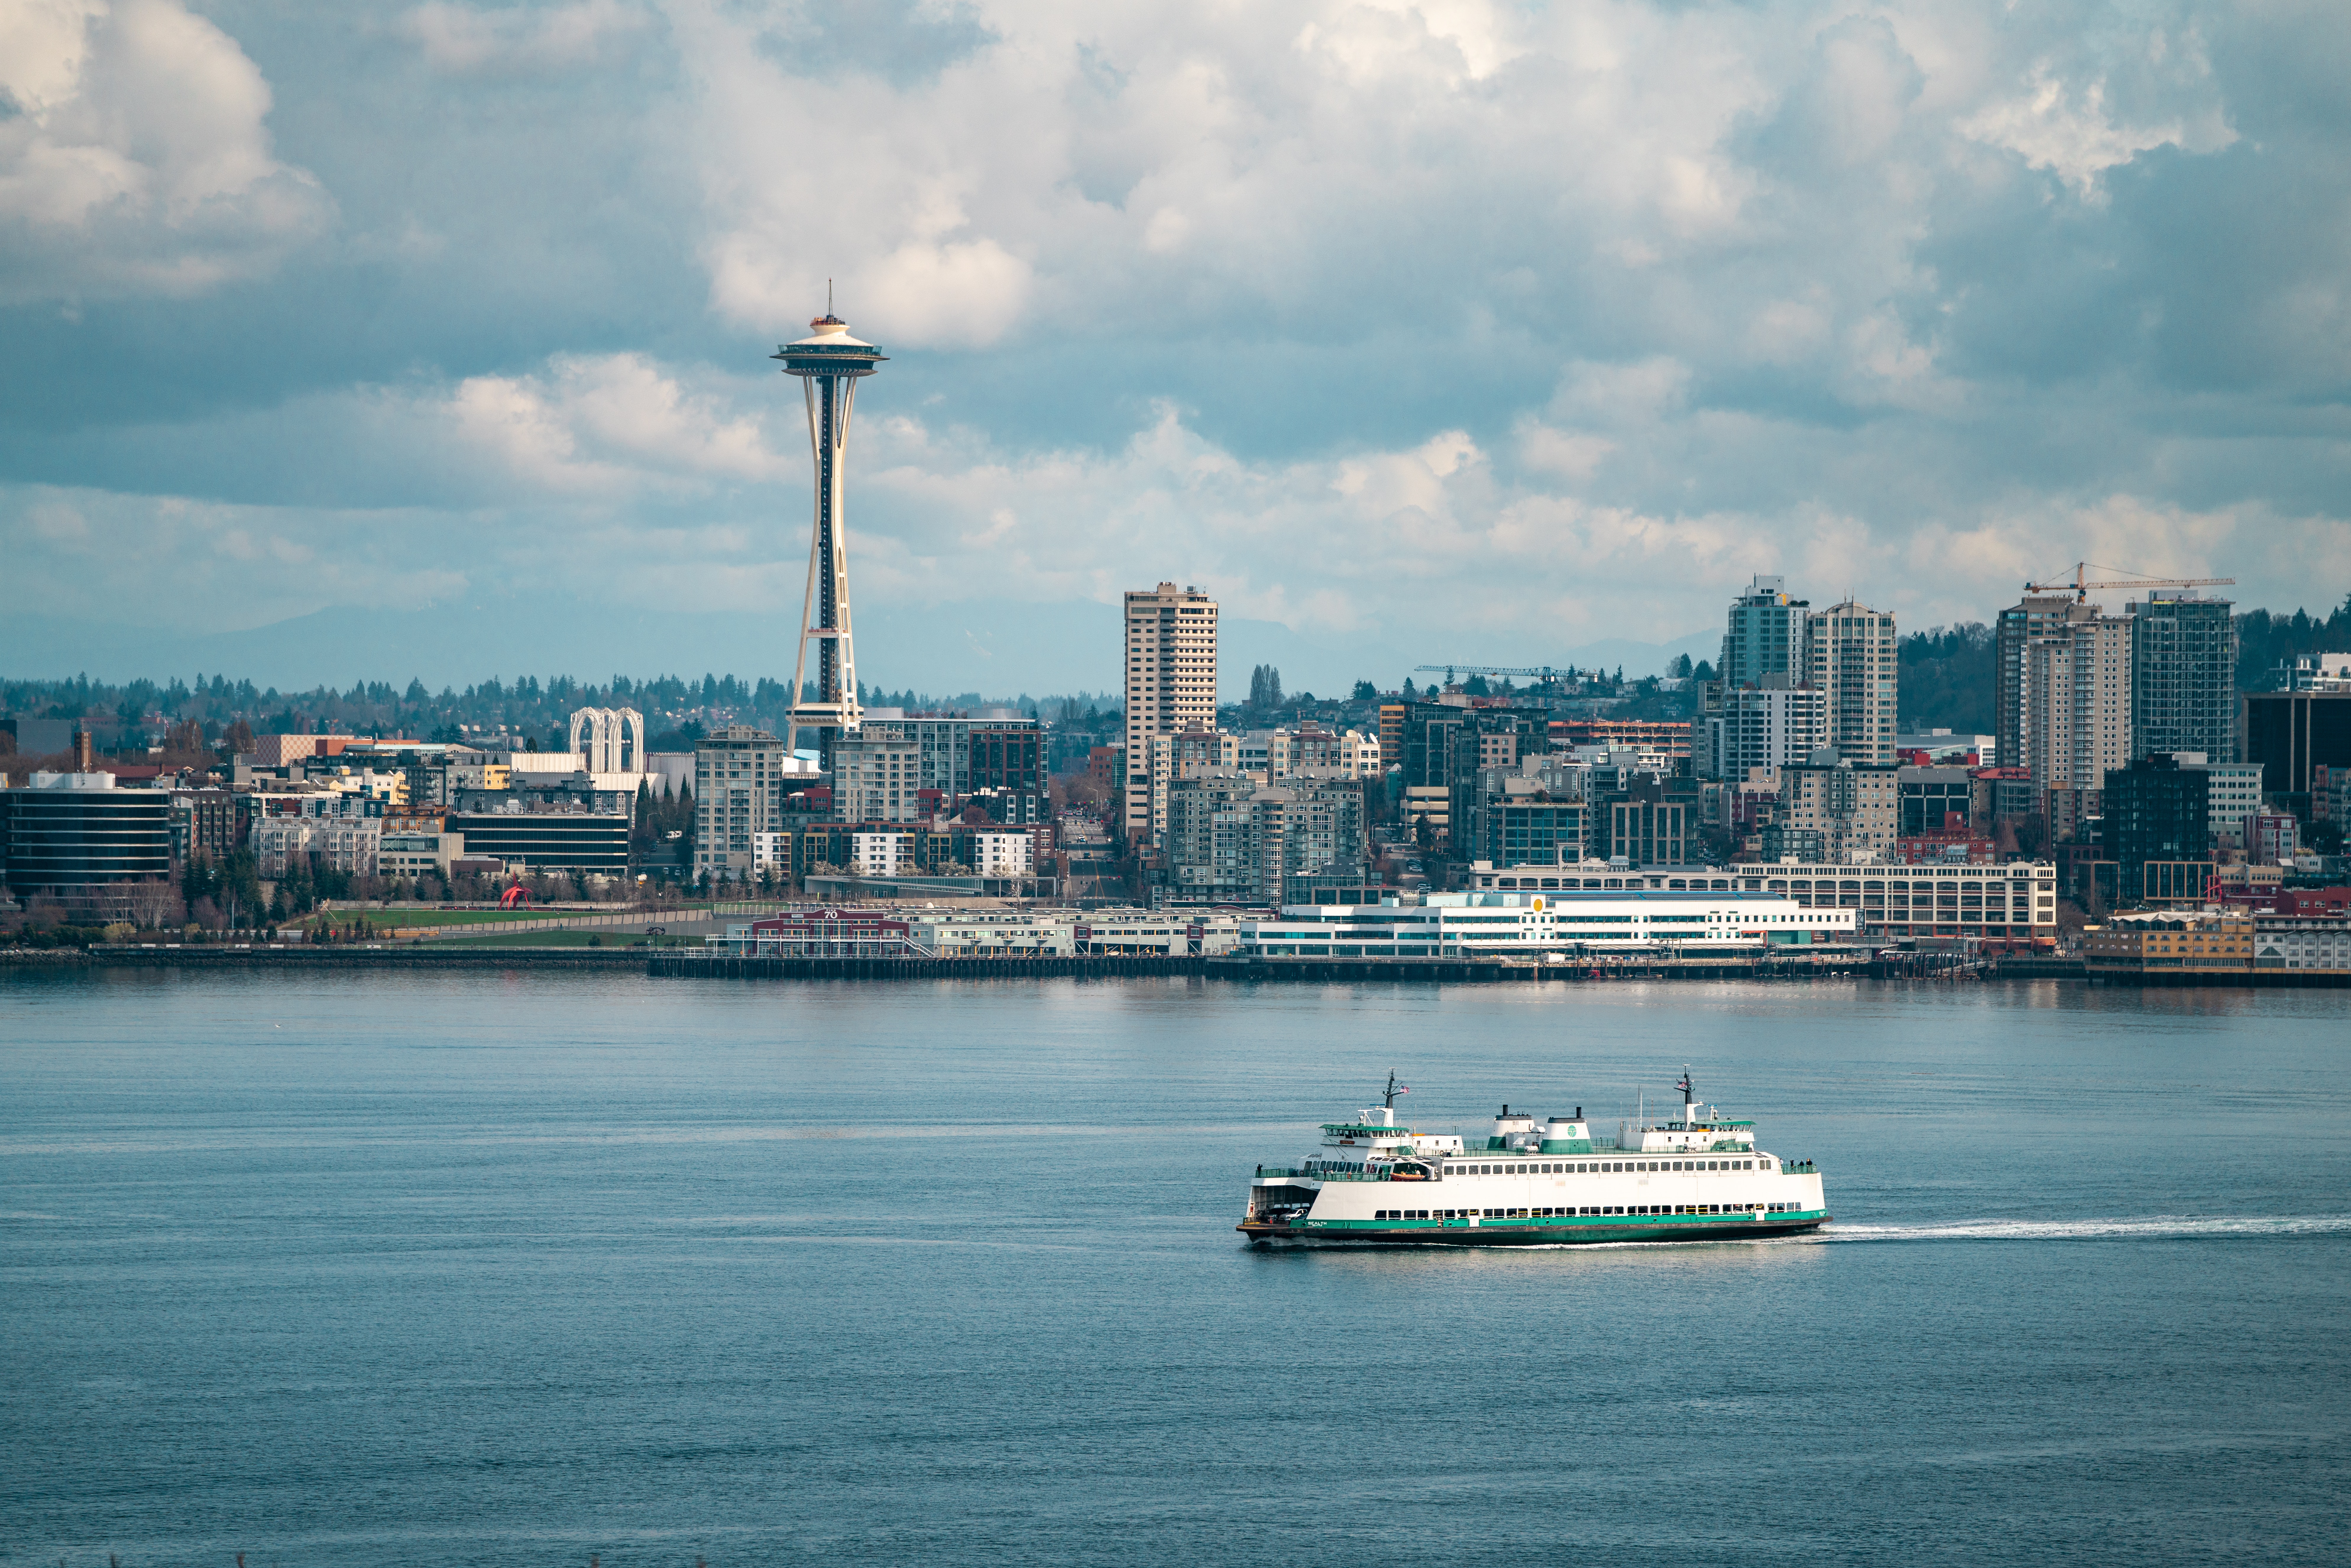 Take in the Sights from the Space Needle Near Redmond